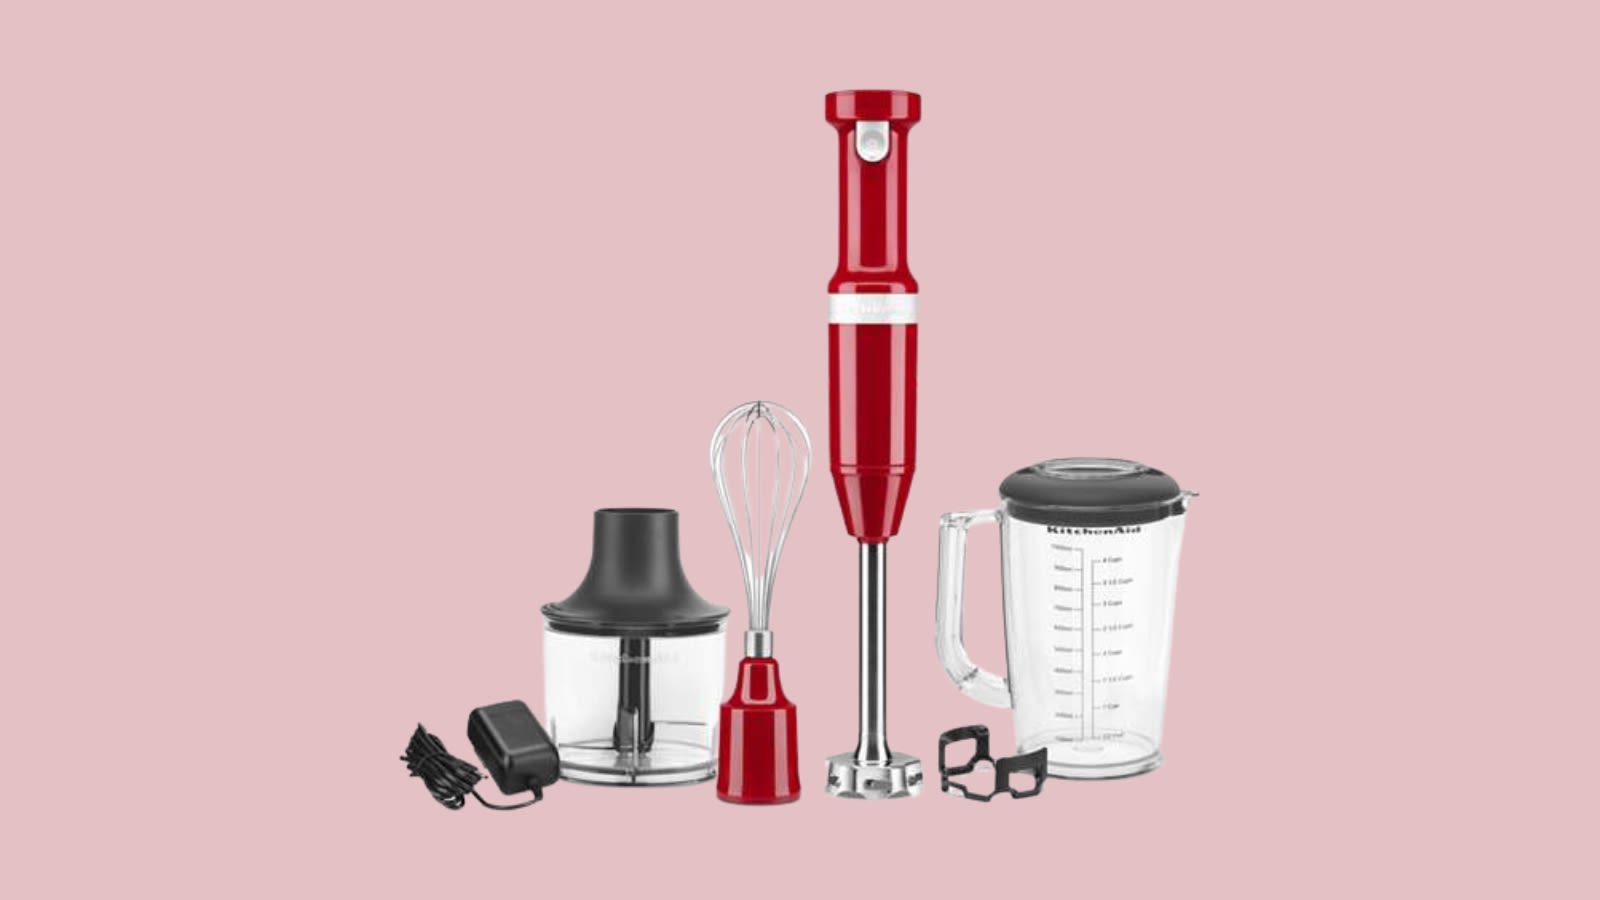 Covetable KitchenAid® Cookware Gifts For Mother's Day